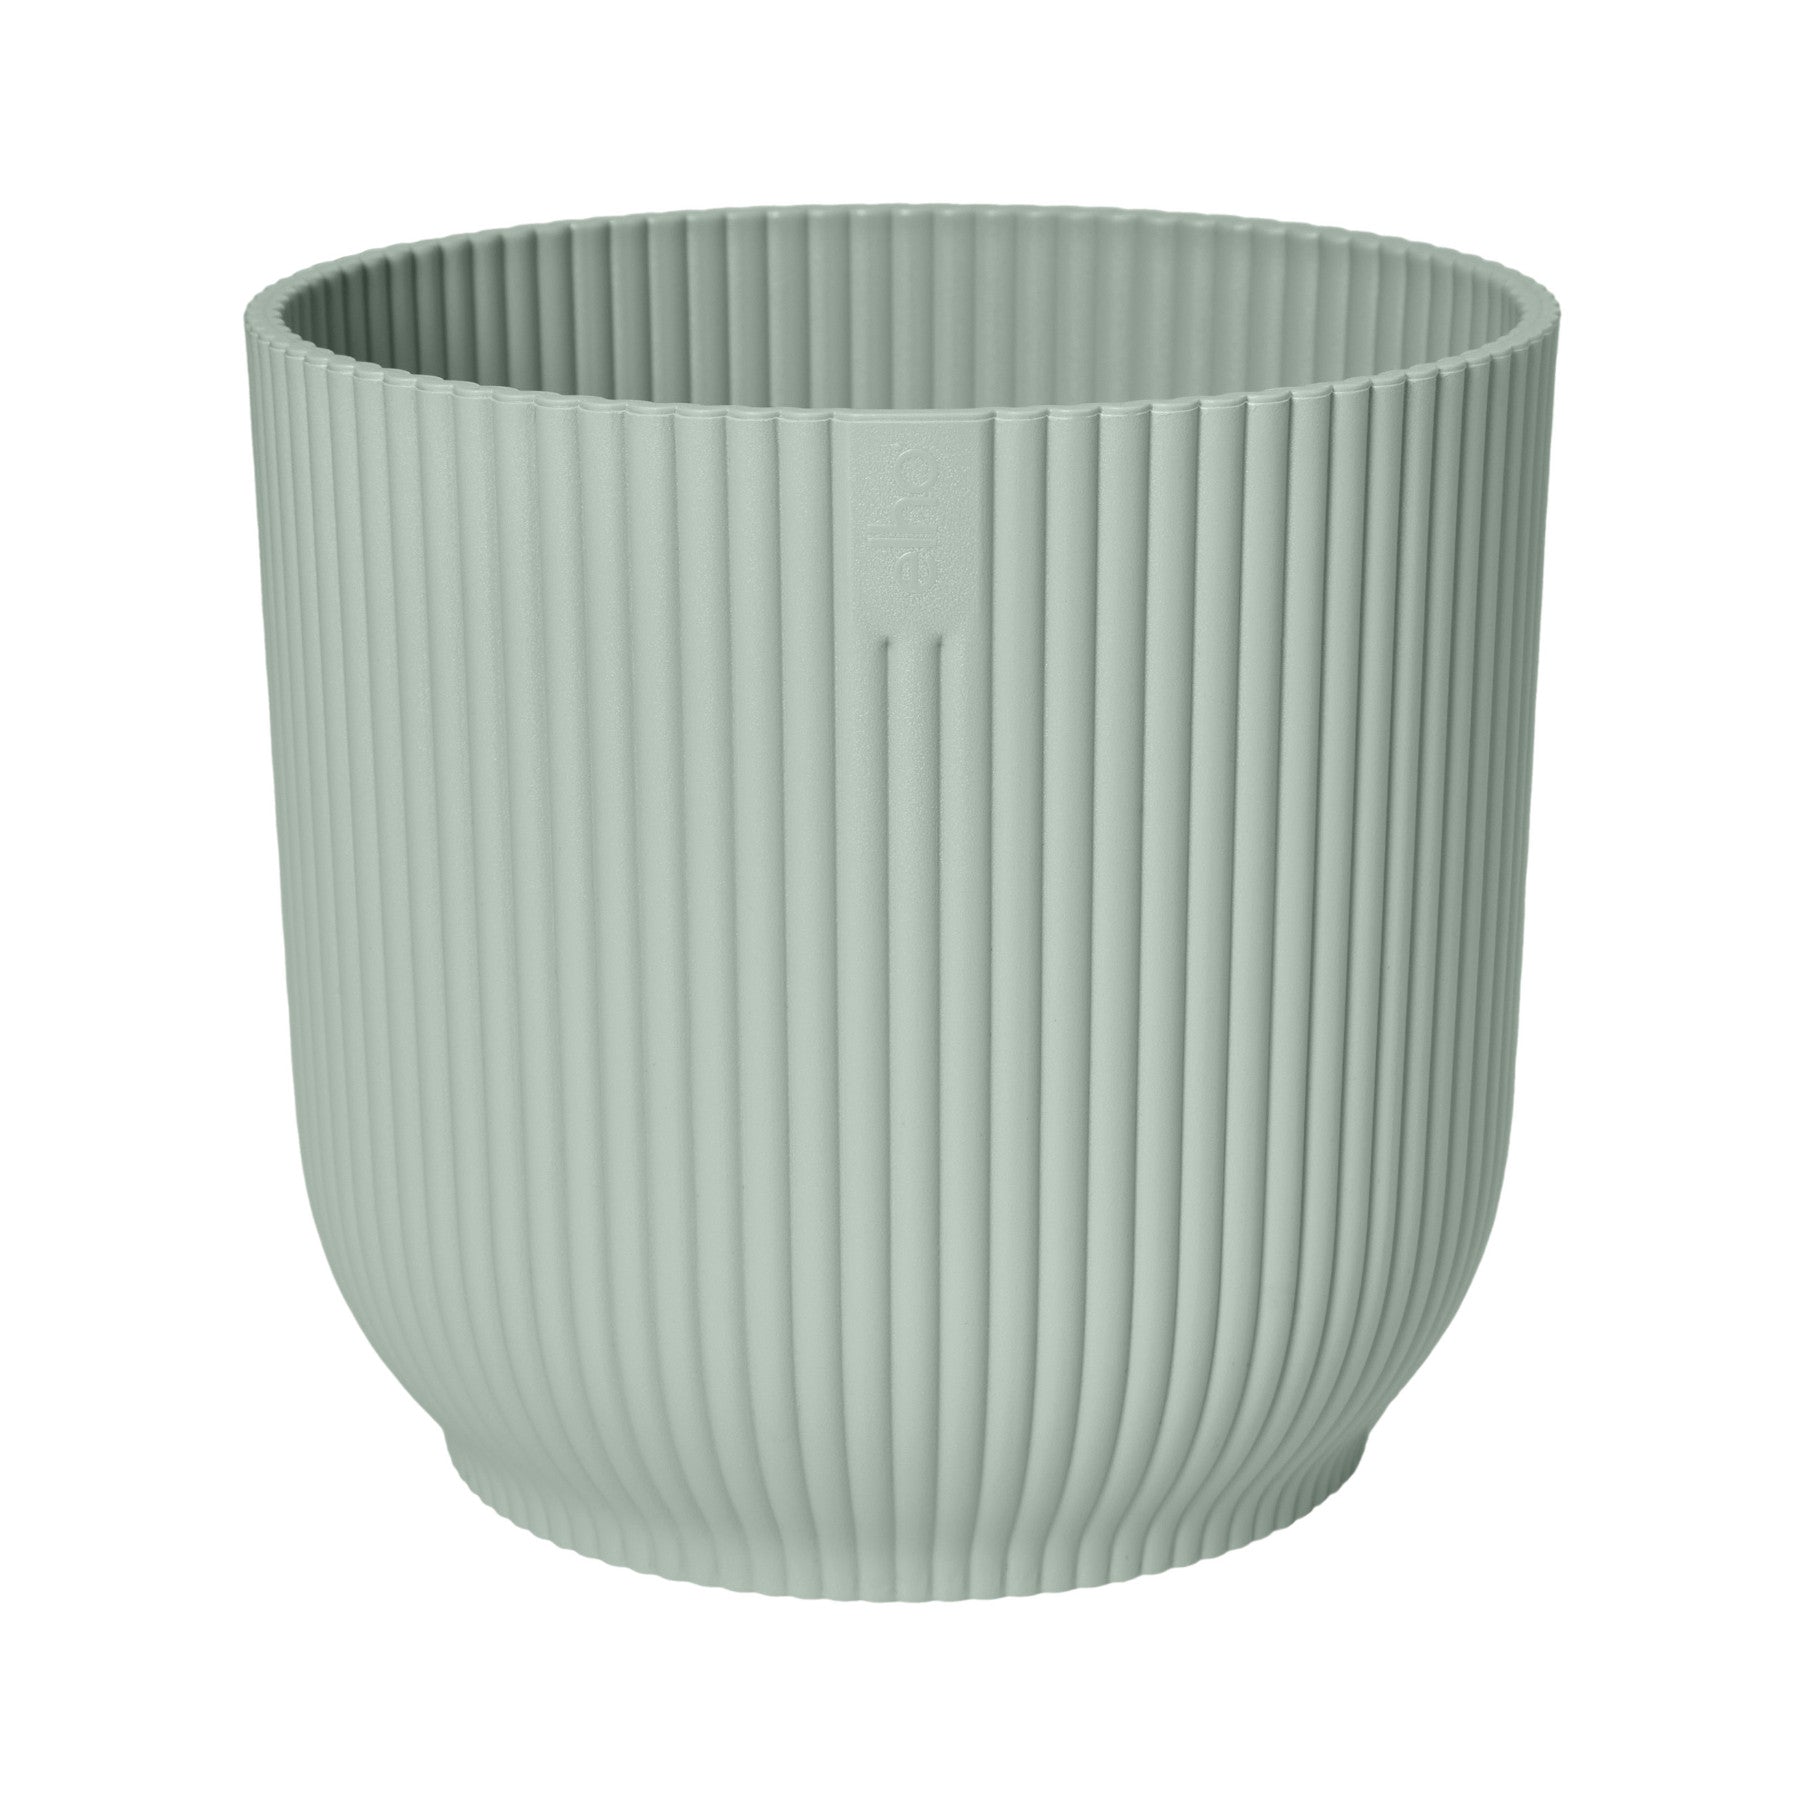 Sage green ceramic planter with vertical ridges and embossed logo on side, modern home decor, empty round pot for indoor plants